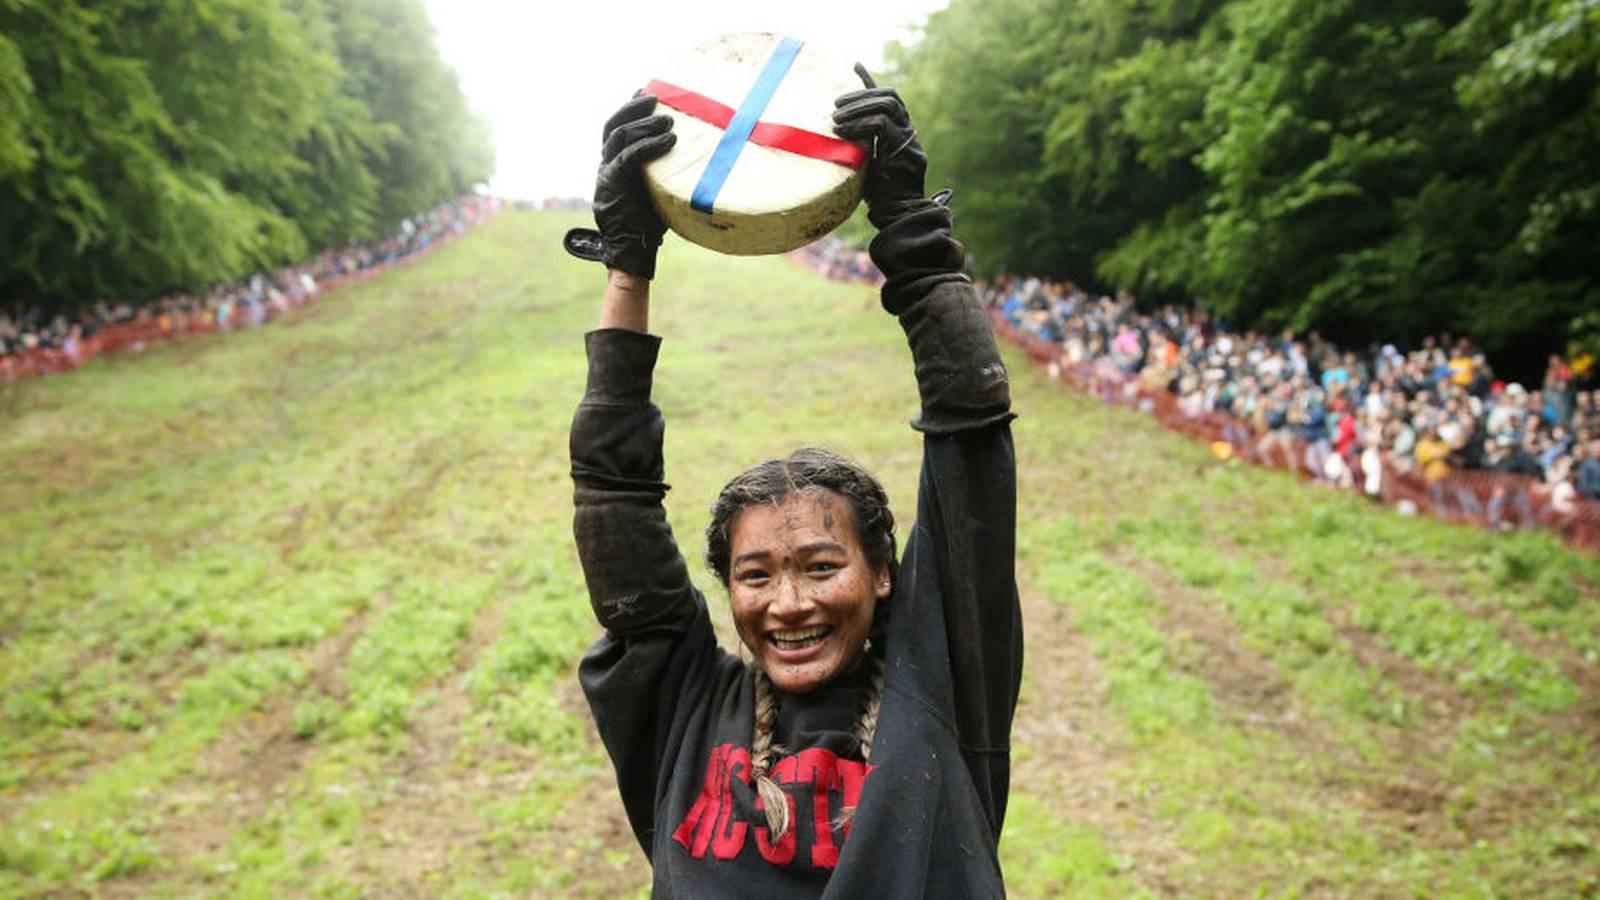 ‘You just have to roll’ American wins cheeserolling race for second